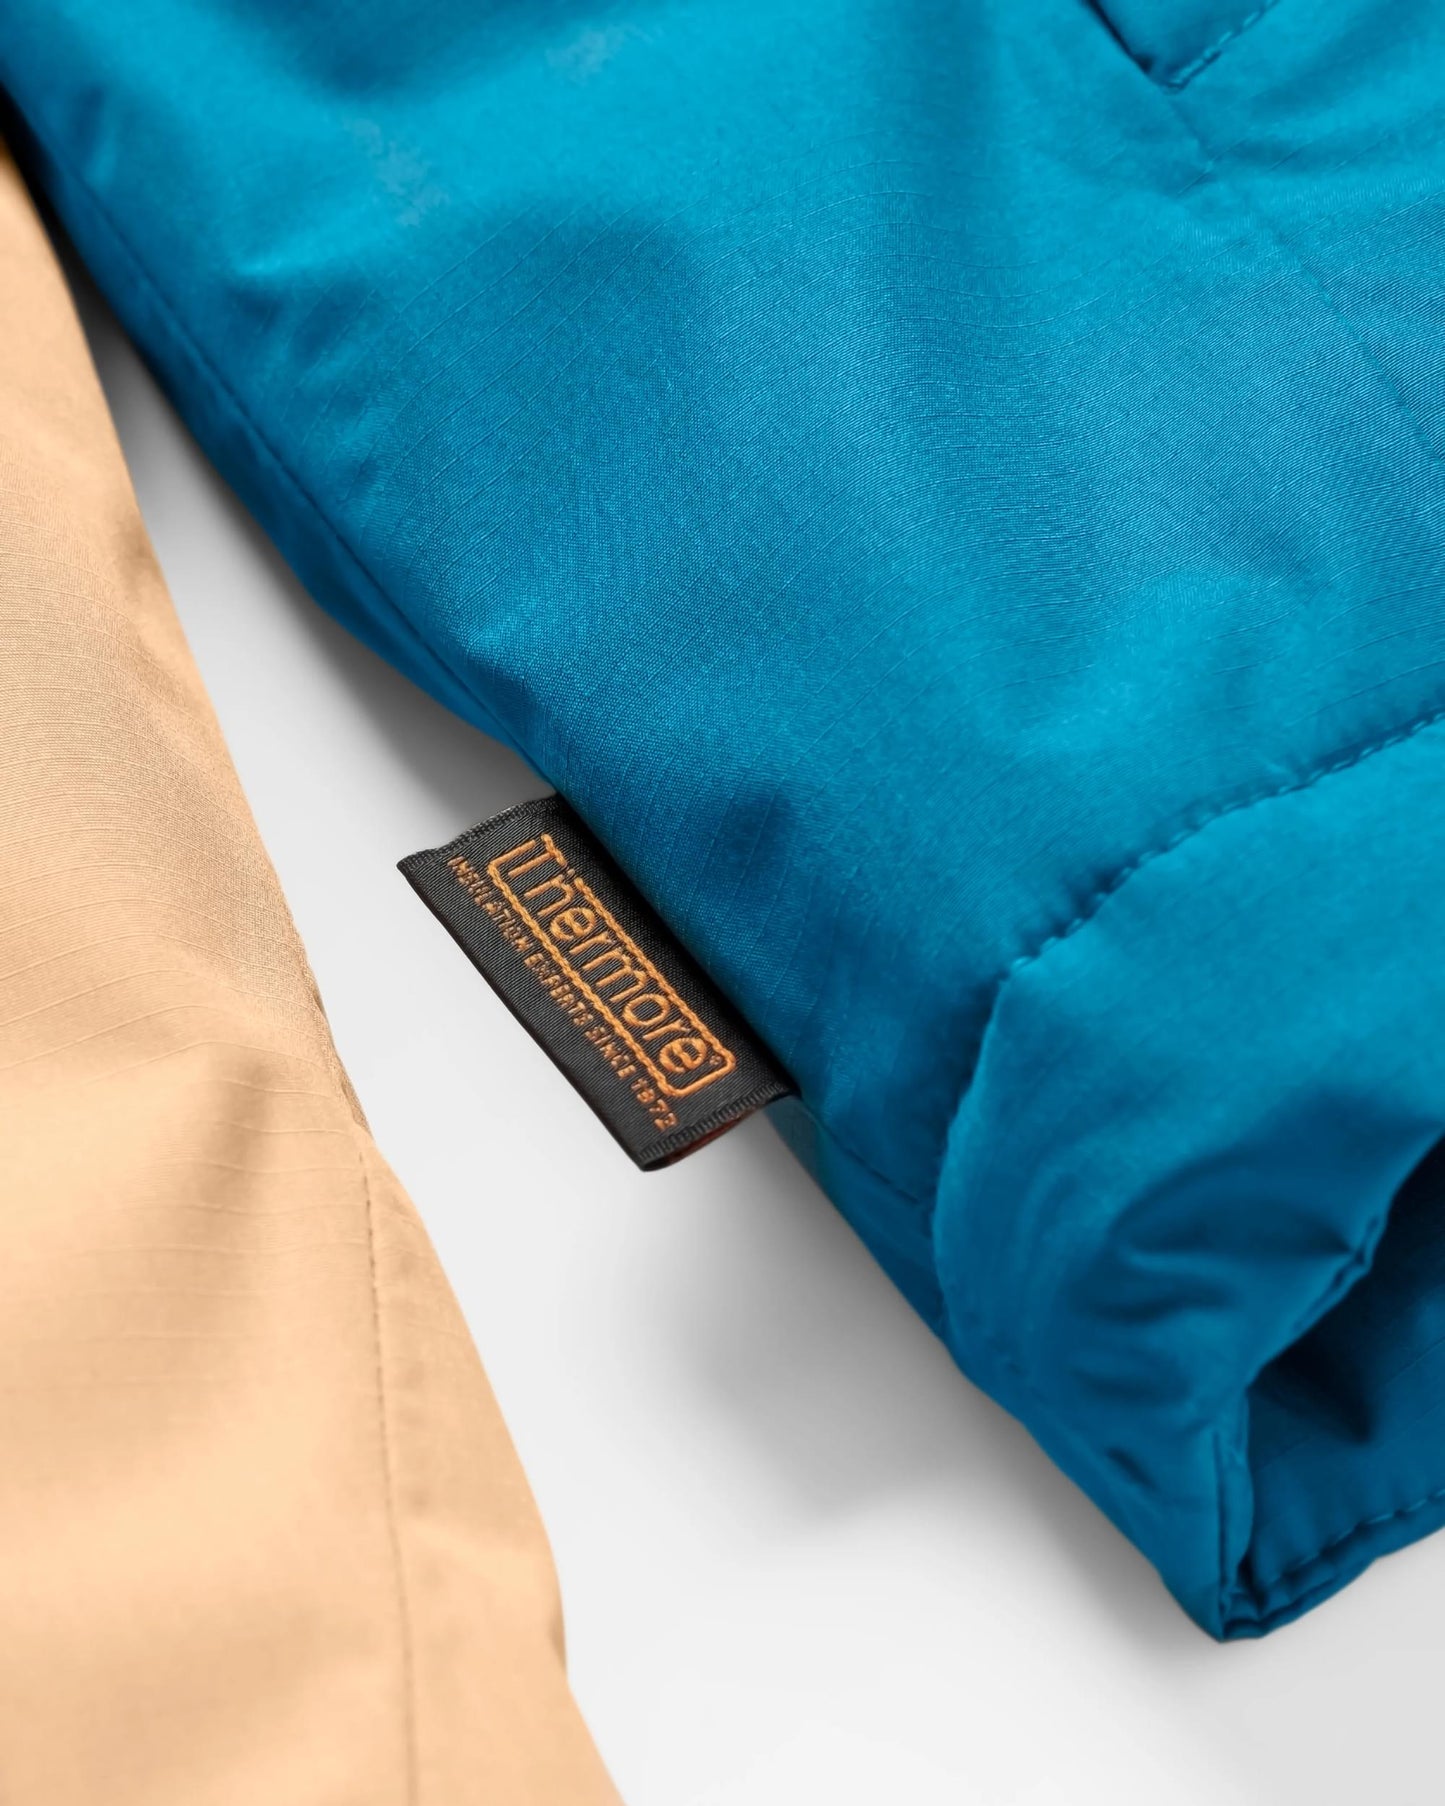 Terrain Insulated Water Resistant Jacket - Corsair Blue/ Apricot